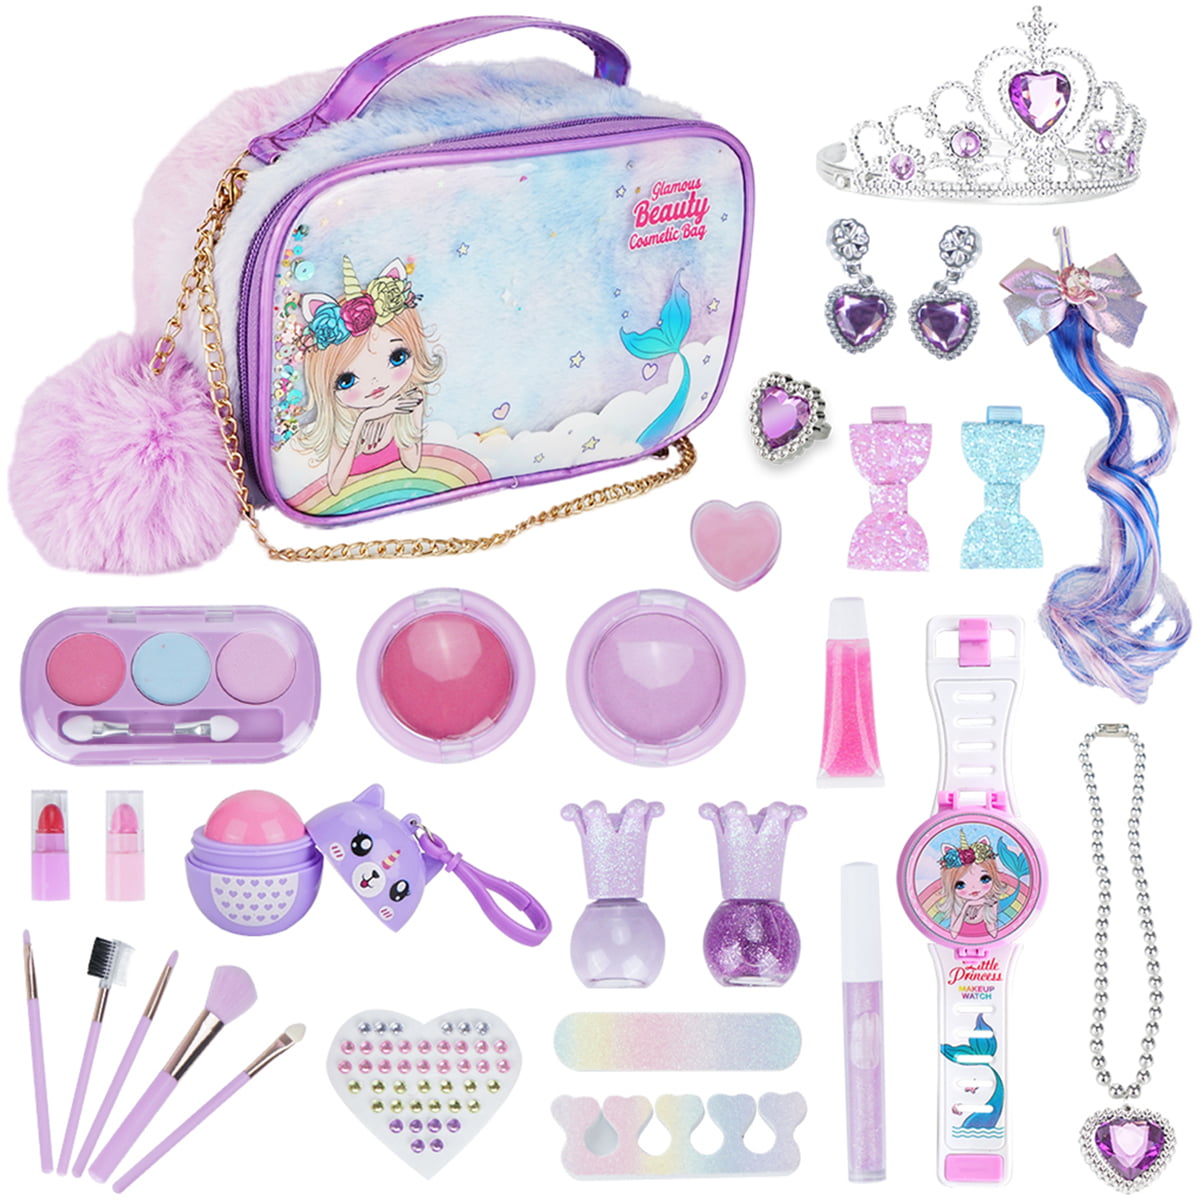 Ferthor Fun Kids Makeup Kit for Girl Pretty Princess Makeup Sets 14 Pcs  Play Make up Toys Washable Cosmetics Bag Gifts for 3 4 5 6 7 8 Year Old  Girls